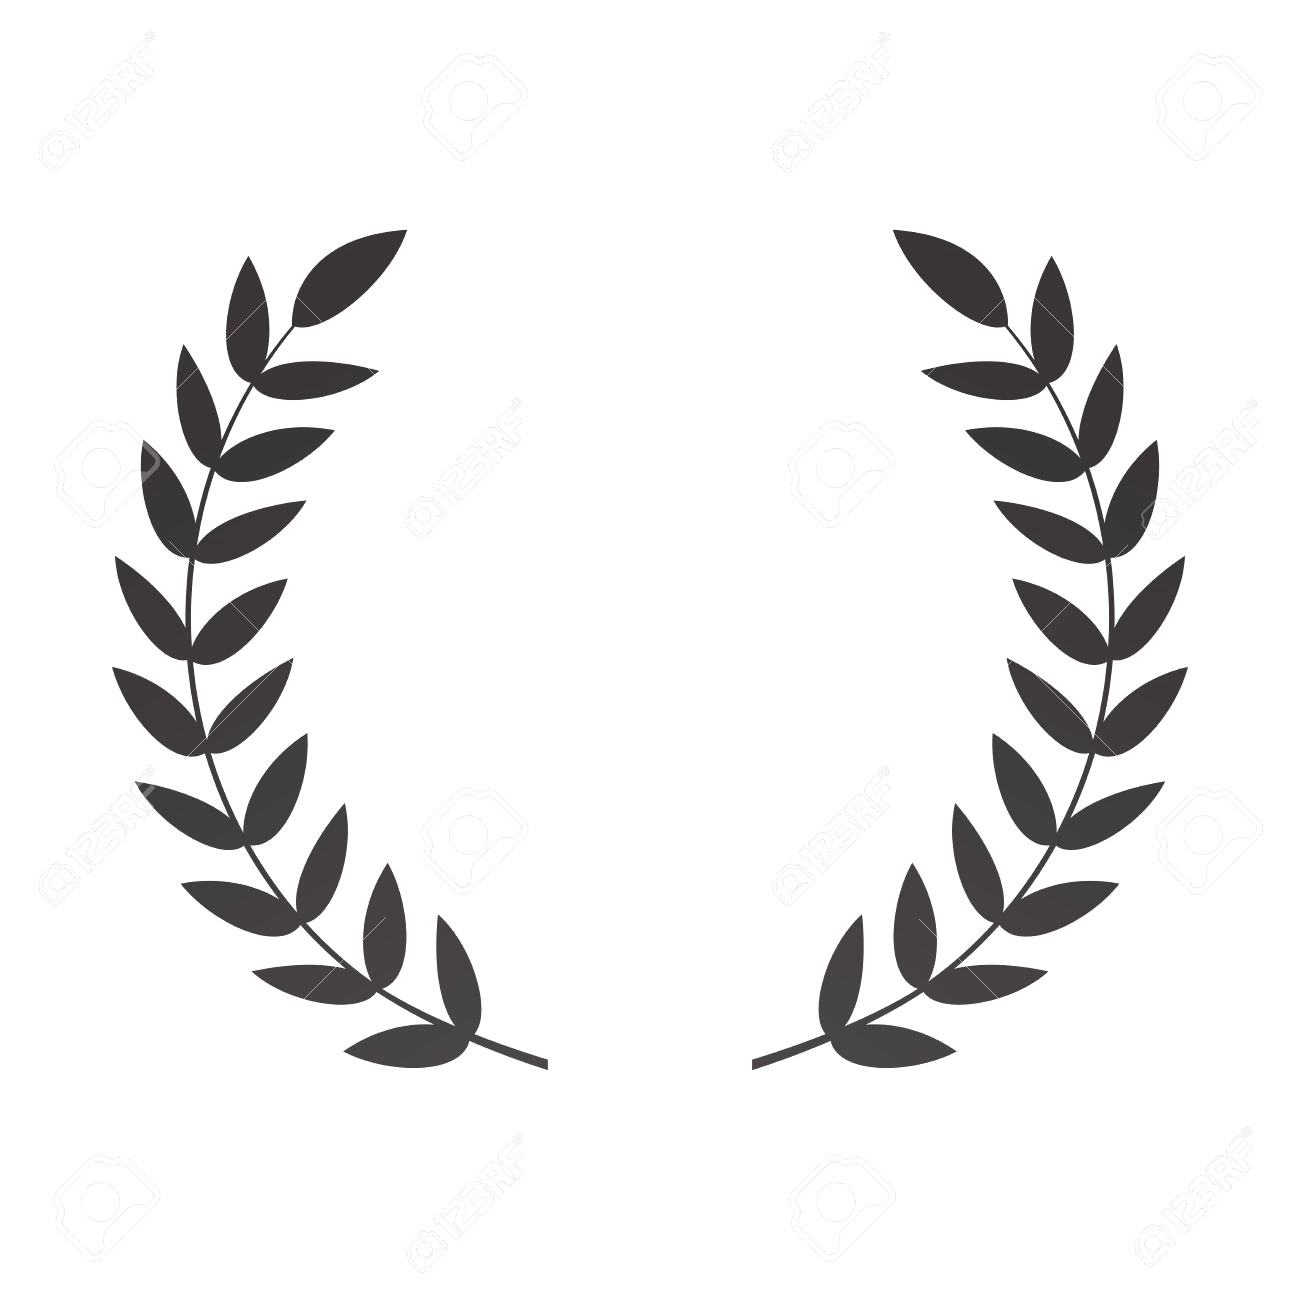 Download Free png Free laurel wreath clipart